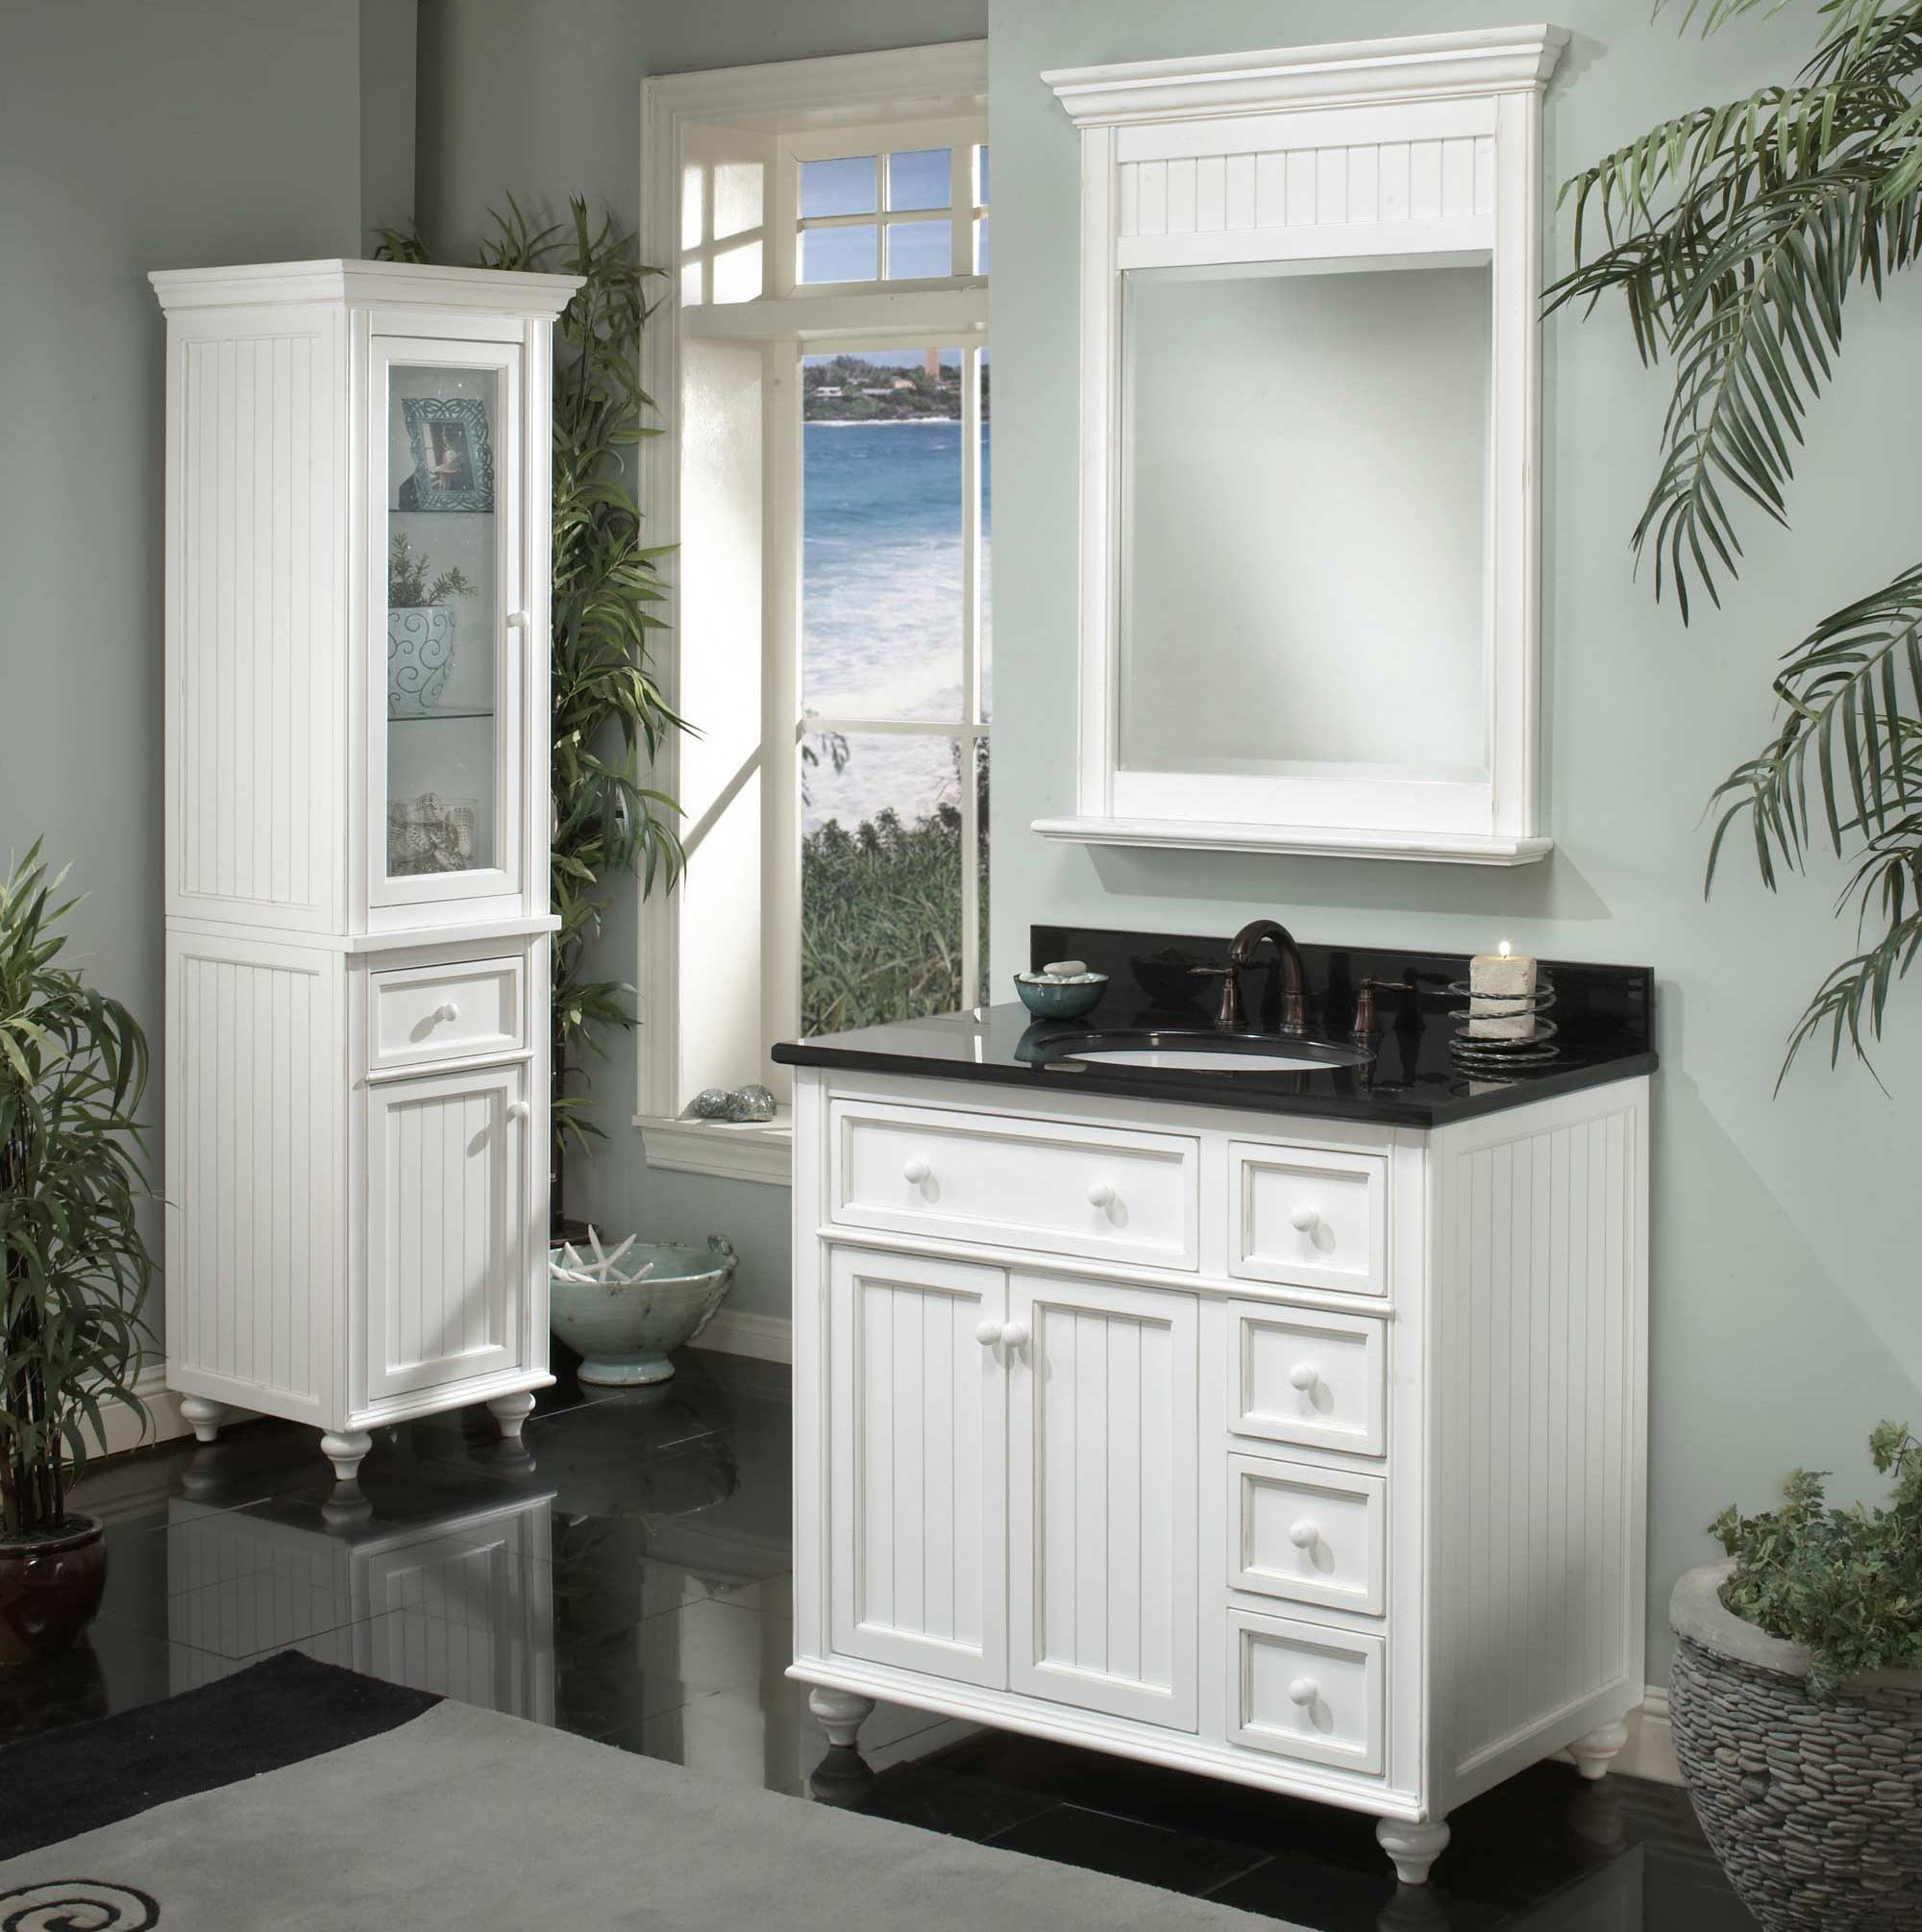 Vanity Cabinets Bathroom
 A Selection of White Bathroom Vanities by Sagehill Designs